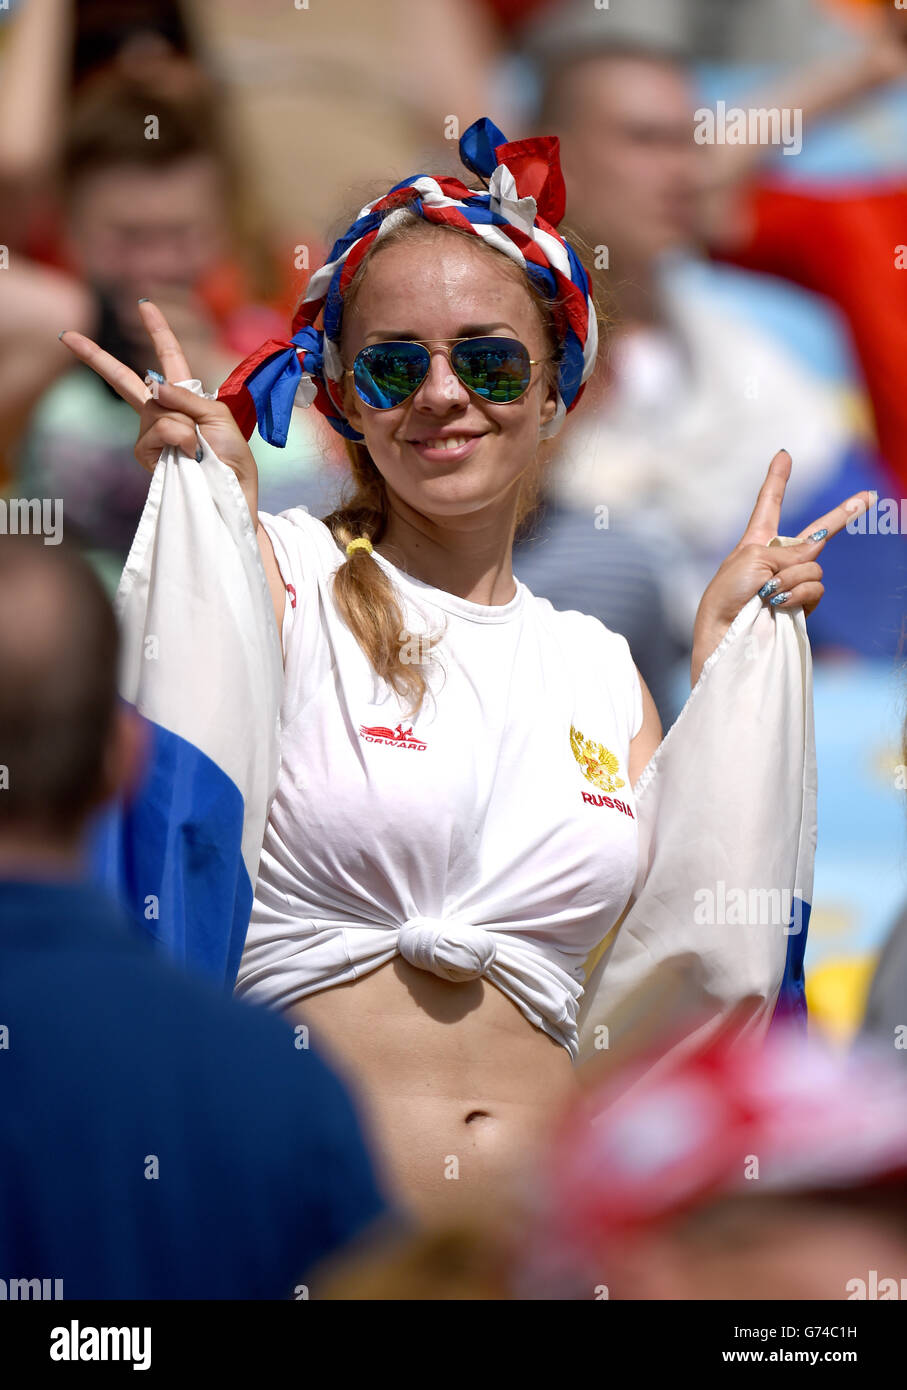 A Russia fan shows support for her team in the stands Stock Photo